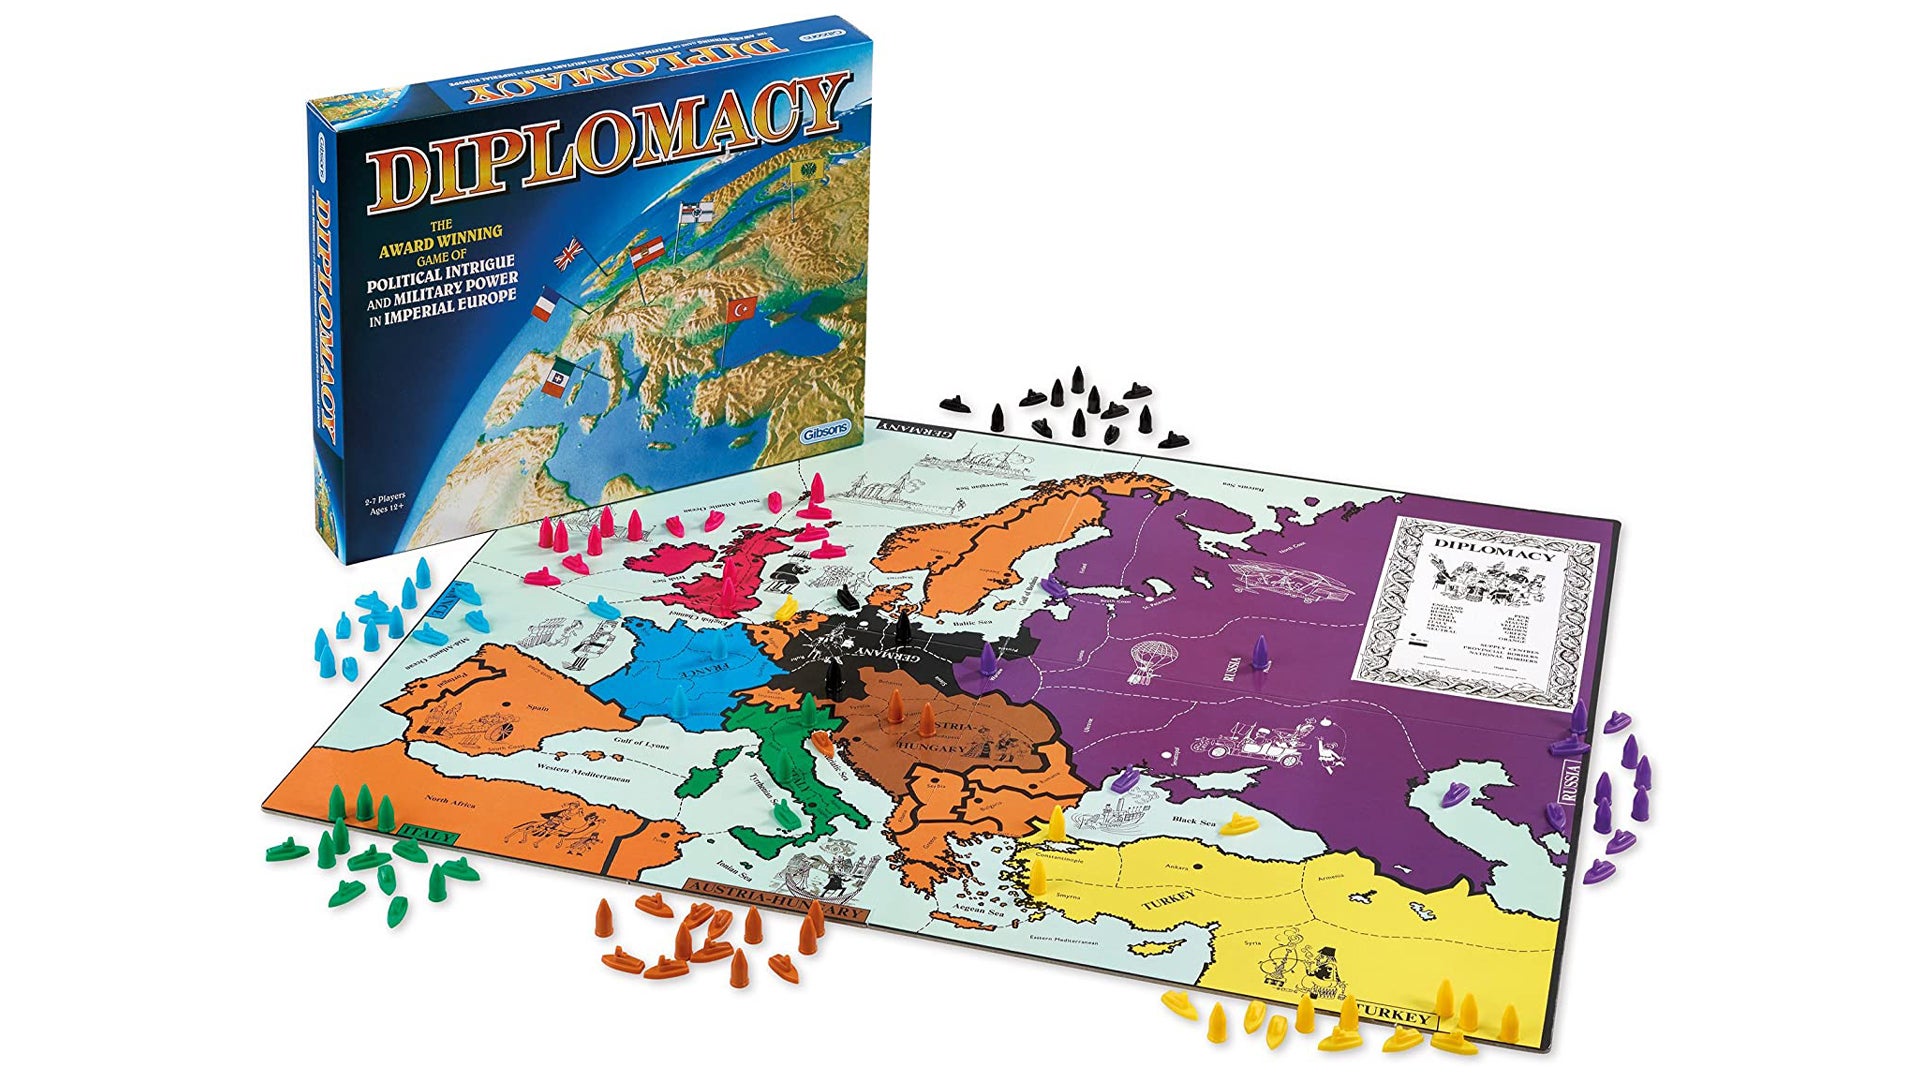 Image for Artificial Intelligence company DeepMind is teaching AI how to play classic board game Diplomacy